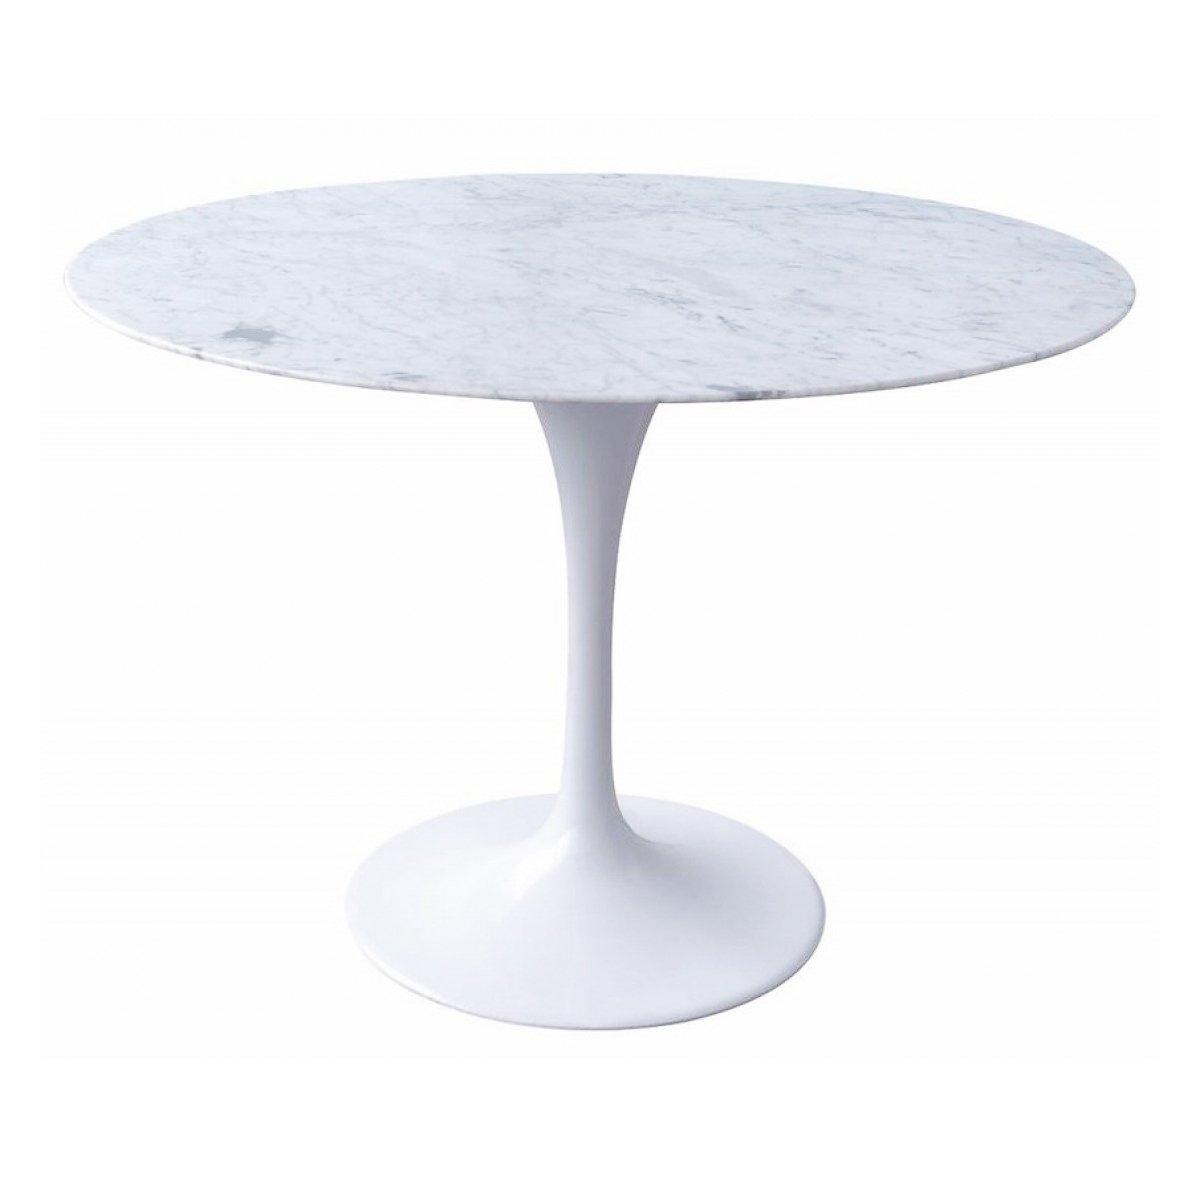 Rose 120cm Round Marble Dining Table - White - Dining Tables